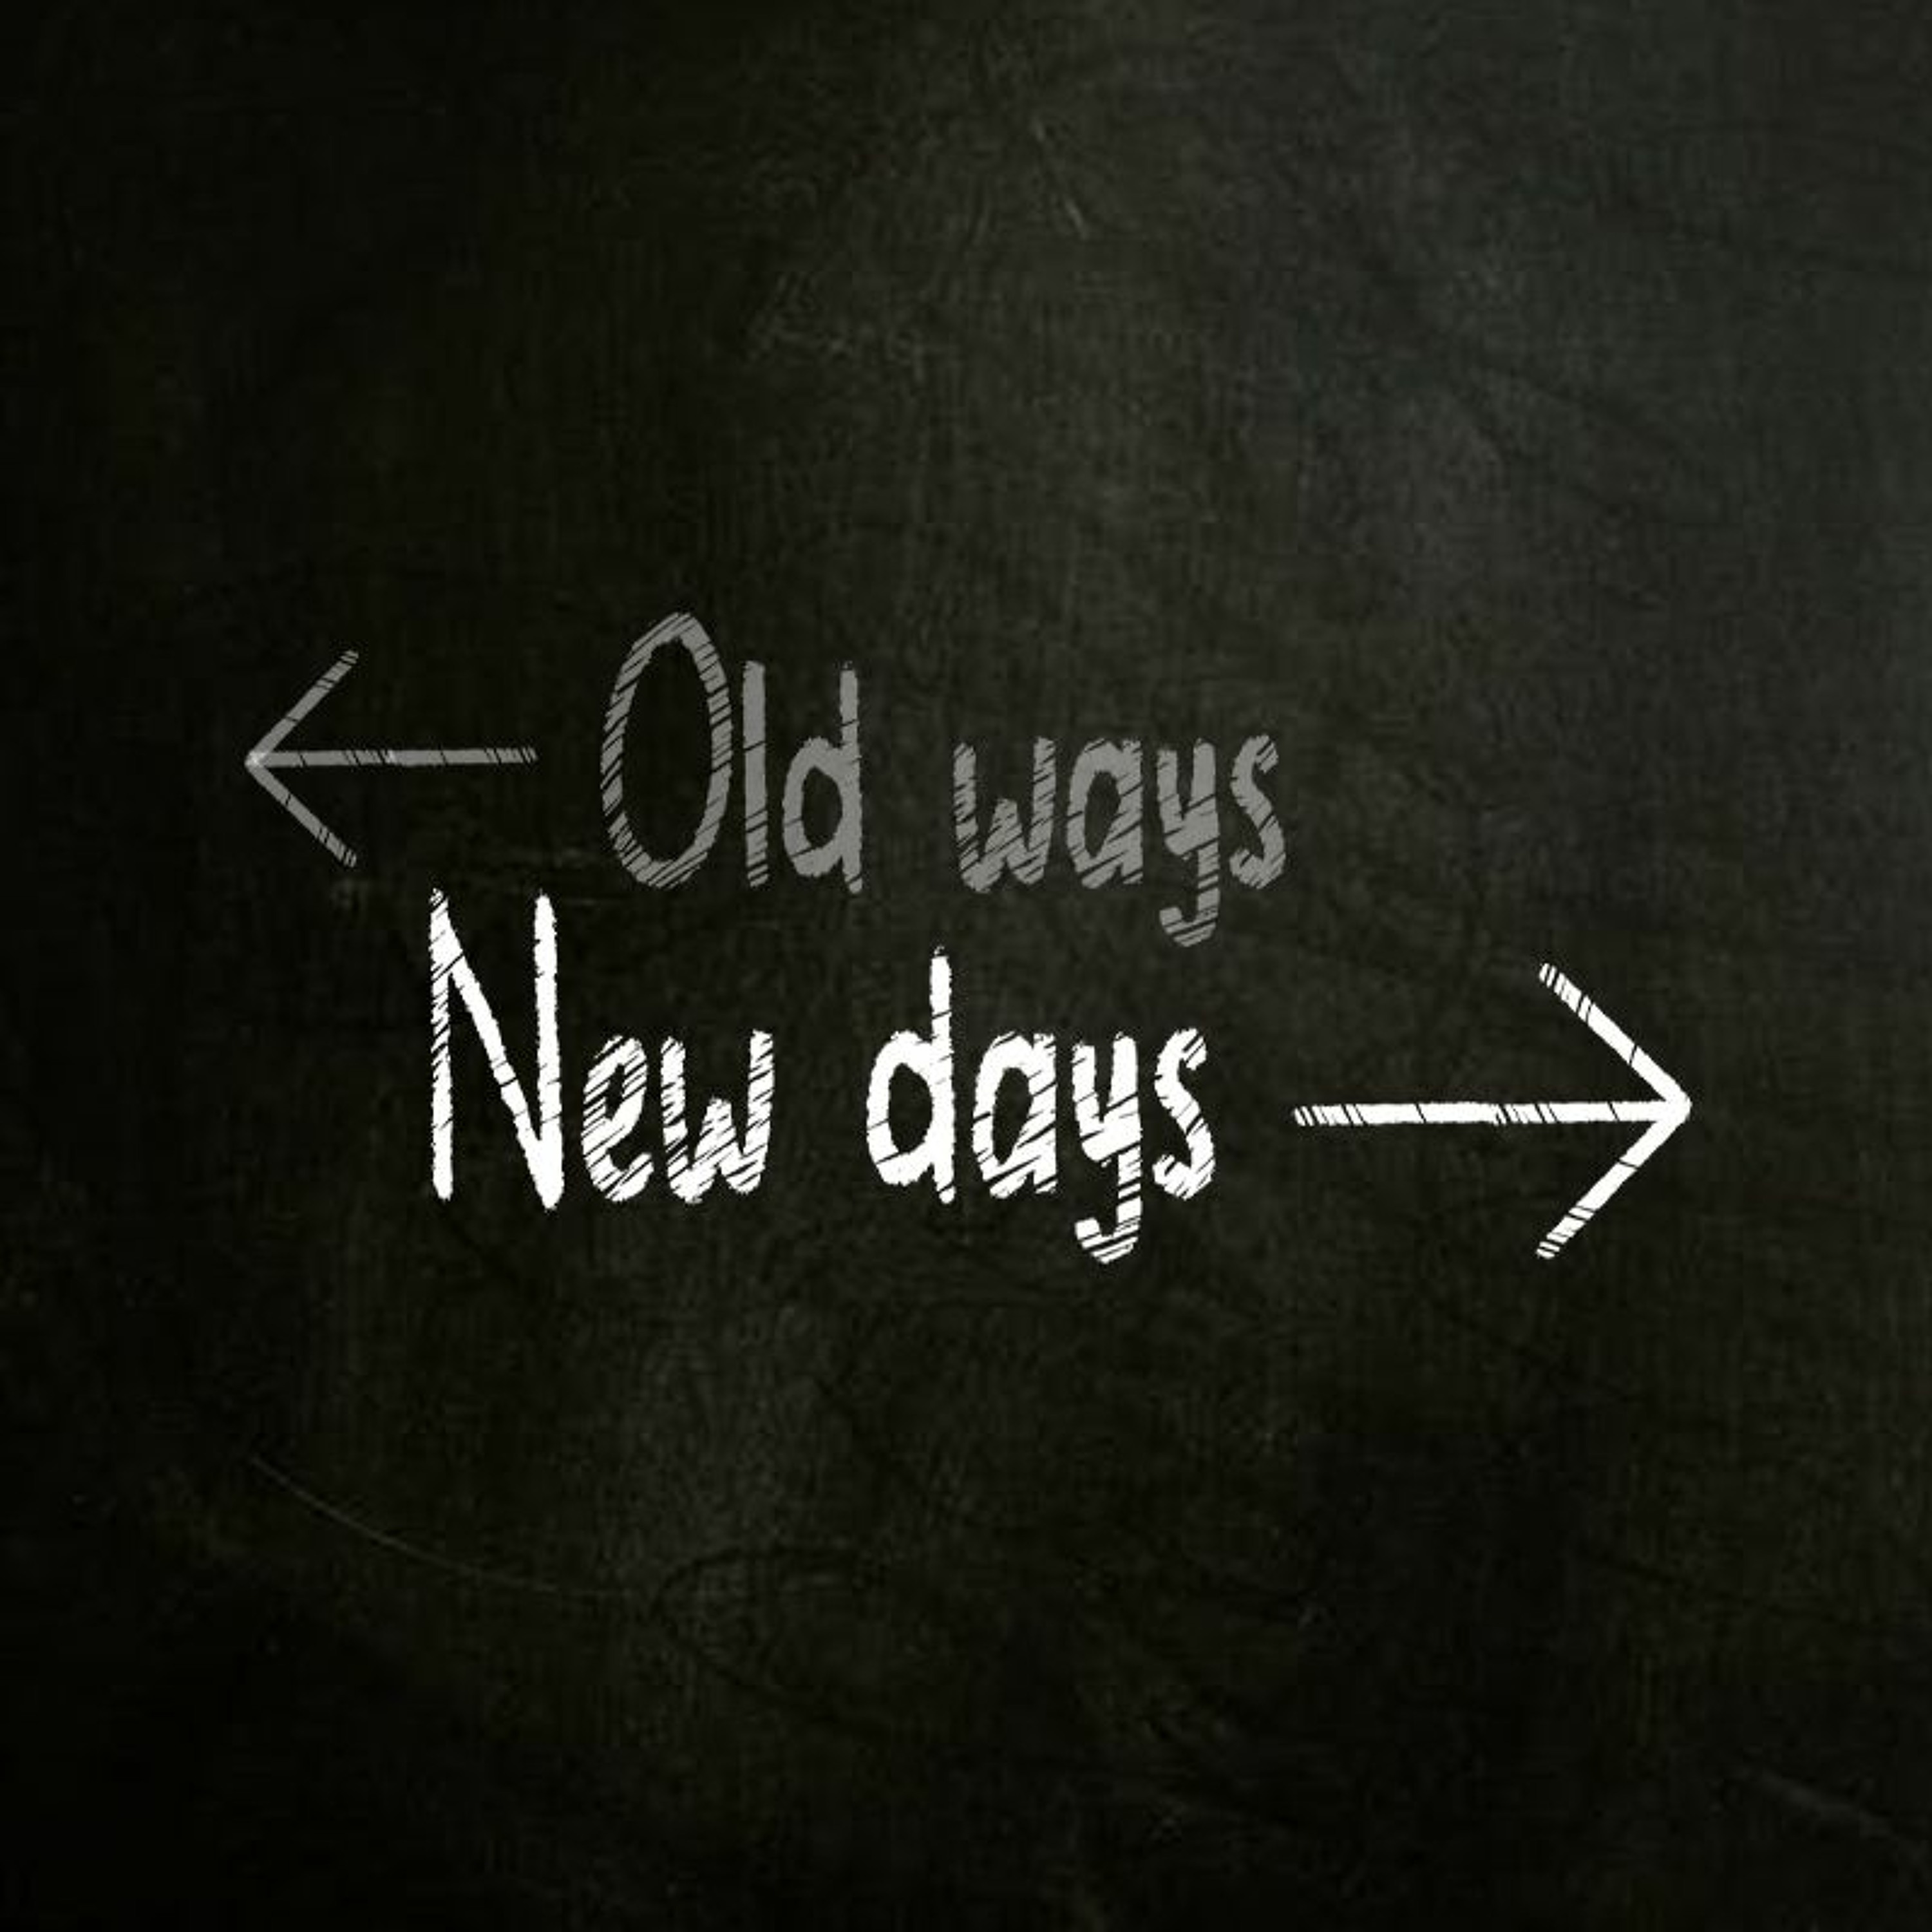 Old ways new days | Waiting for God